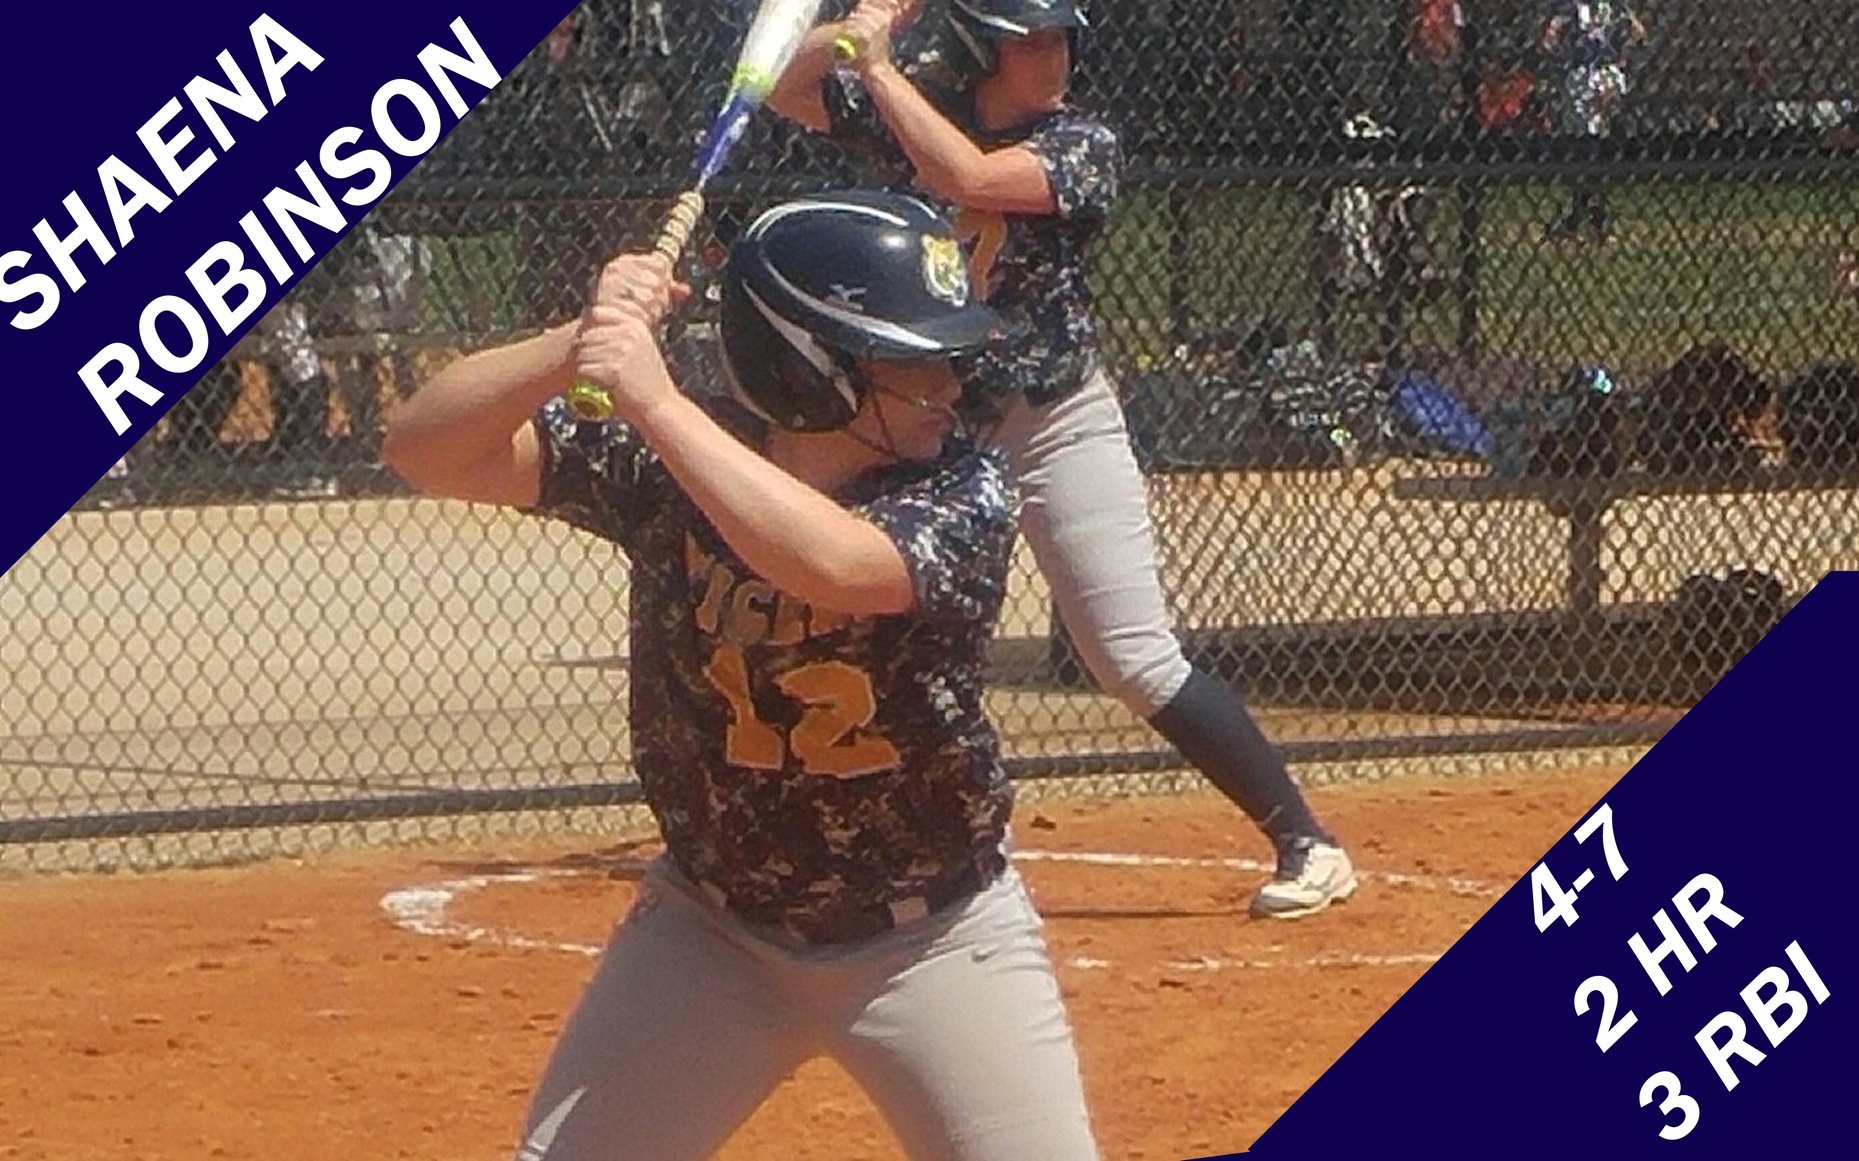 Shaena Robinson hit two home runs in the MCC Tigers' opening win vs. Iowa Lakes on Thursday